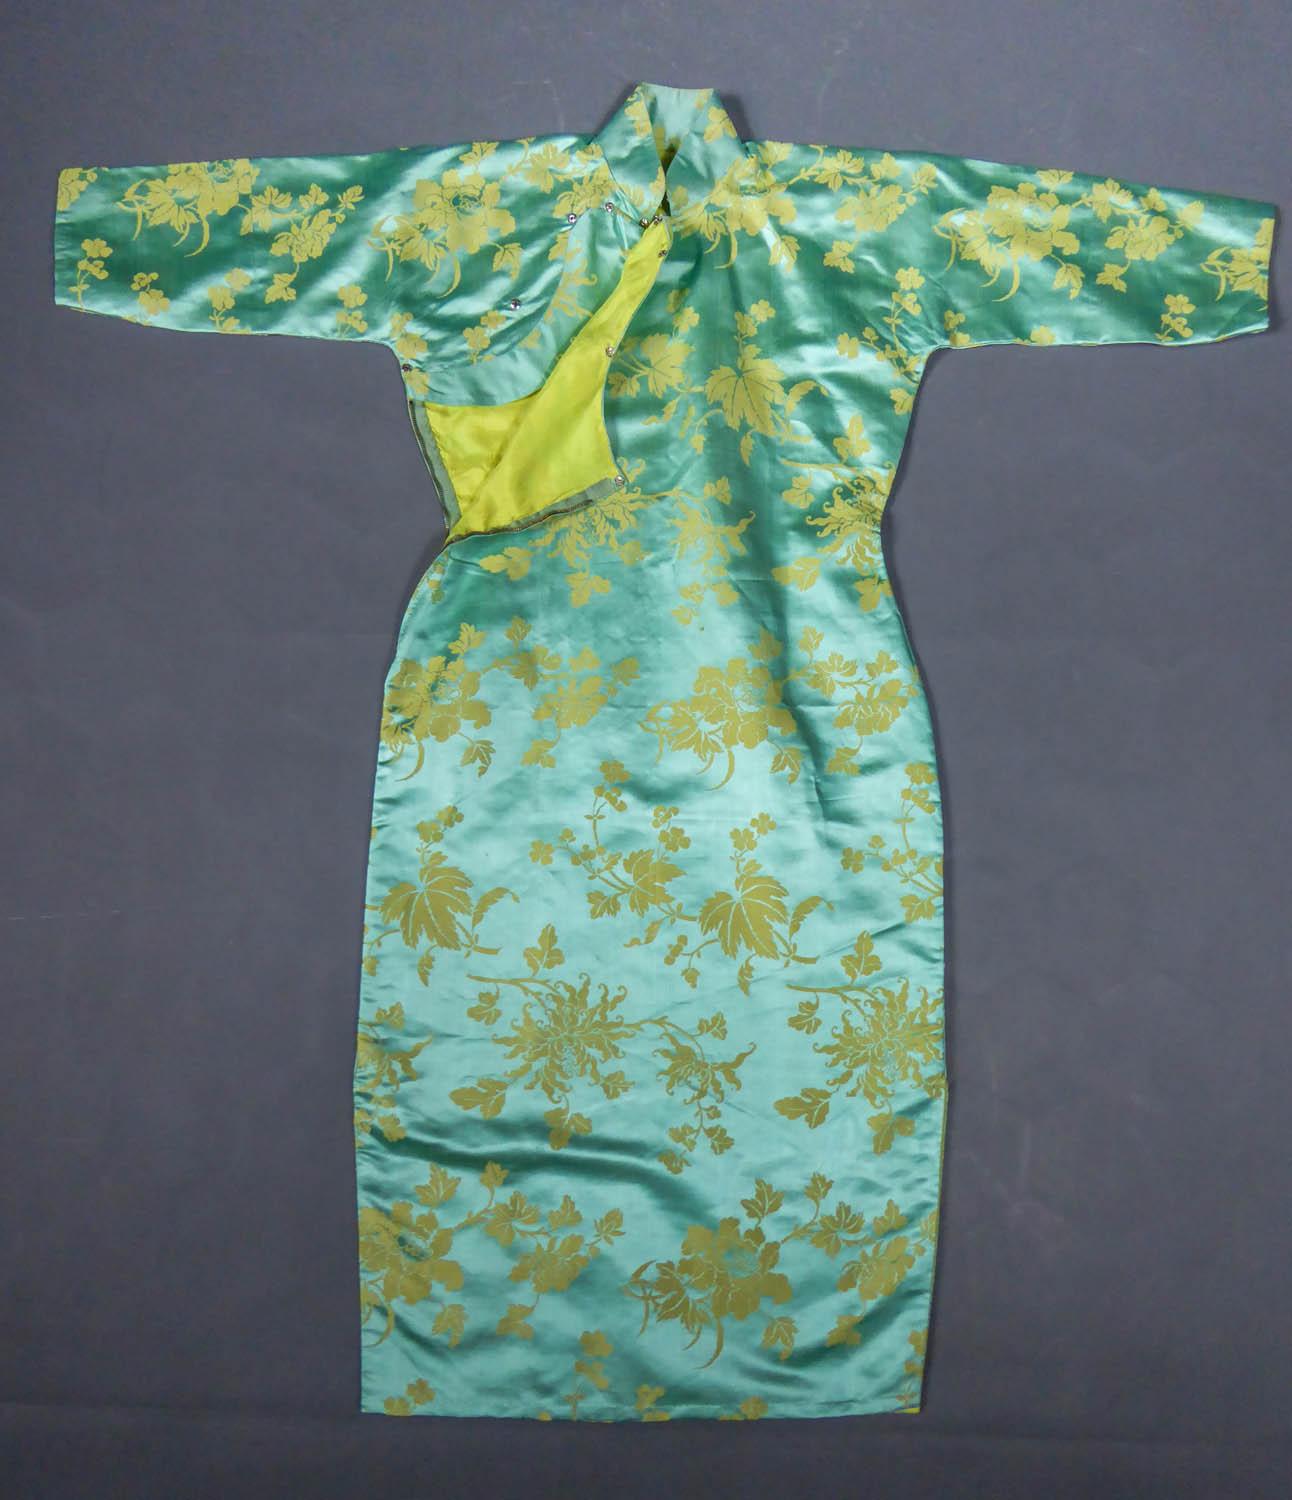 Circa 1950/1960
France

Skin-tight chinese dress called qipao or cheongsam in sky-blue and straw-yellow silk damask dating from the years 1950/1960. Damask sky-blue satin background with large stylized flowers, peonies and / or chrysanthemums (?) in